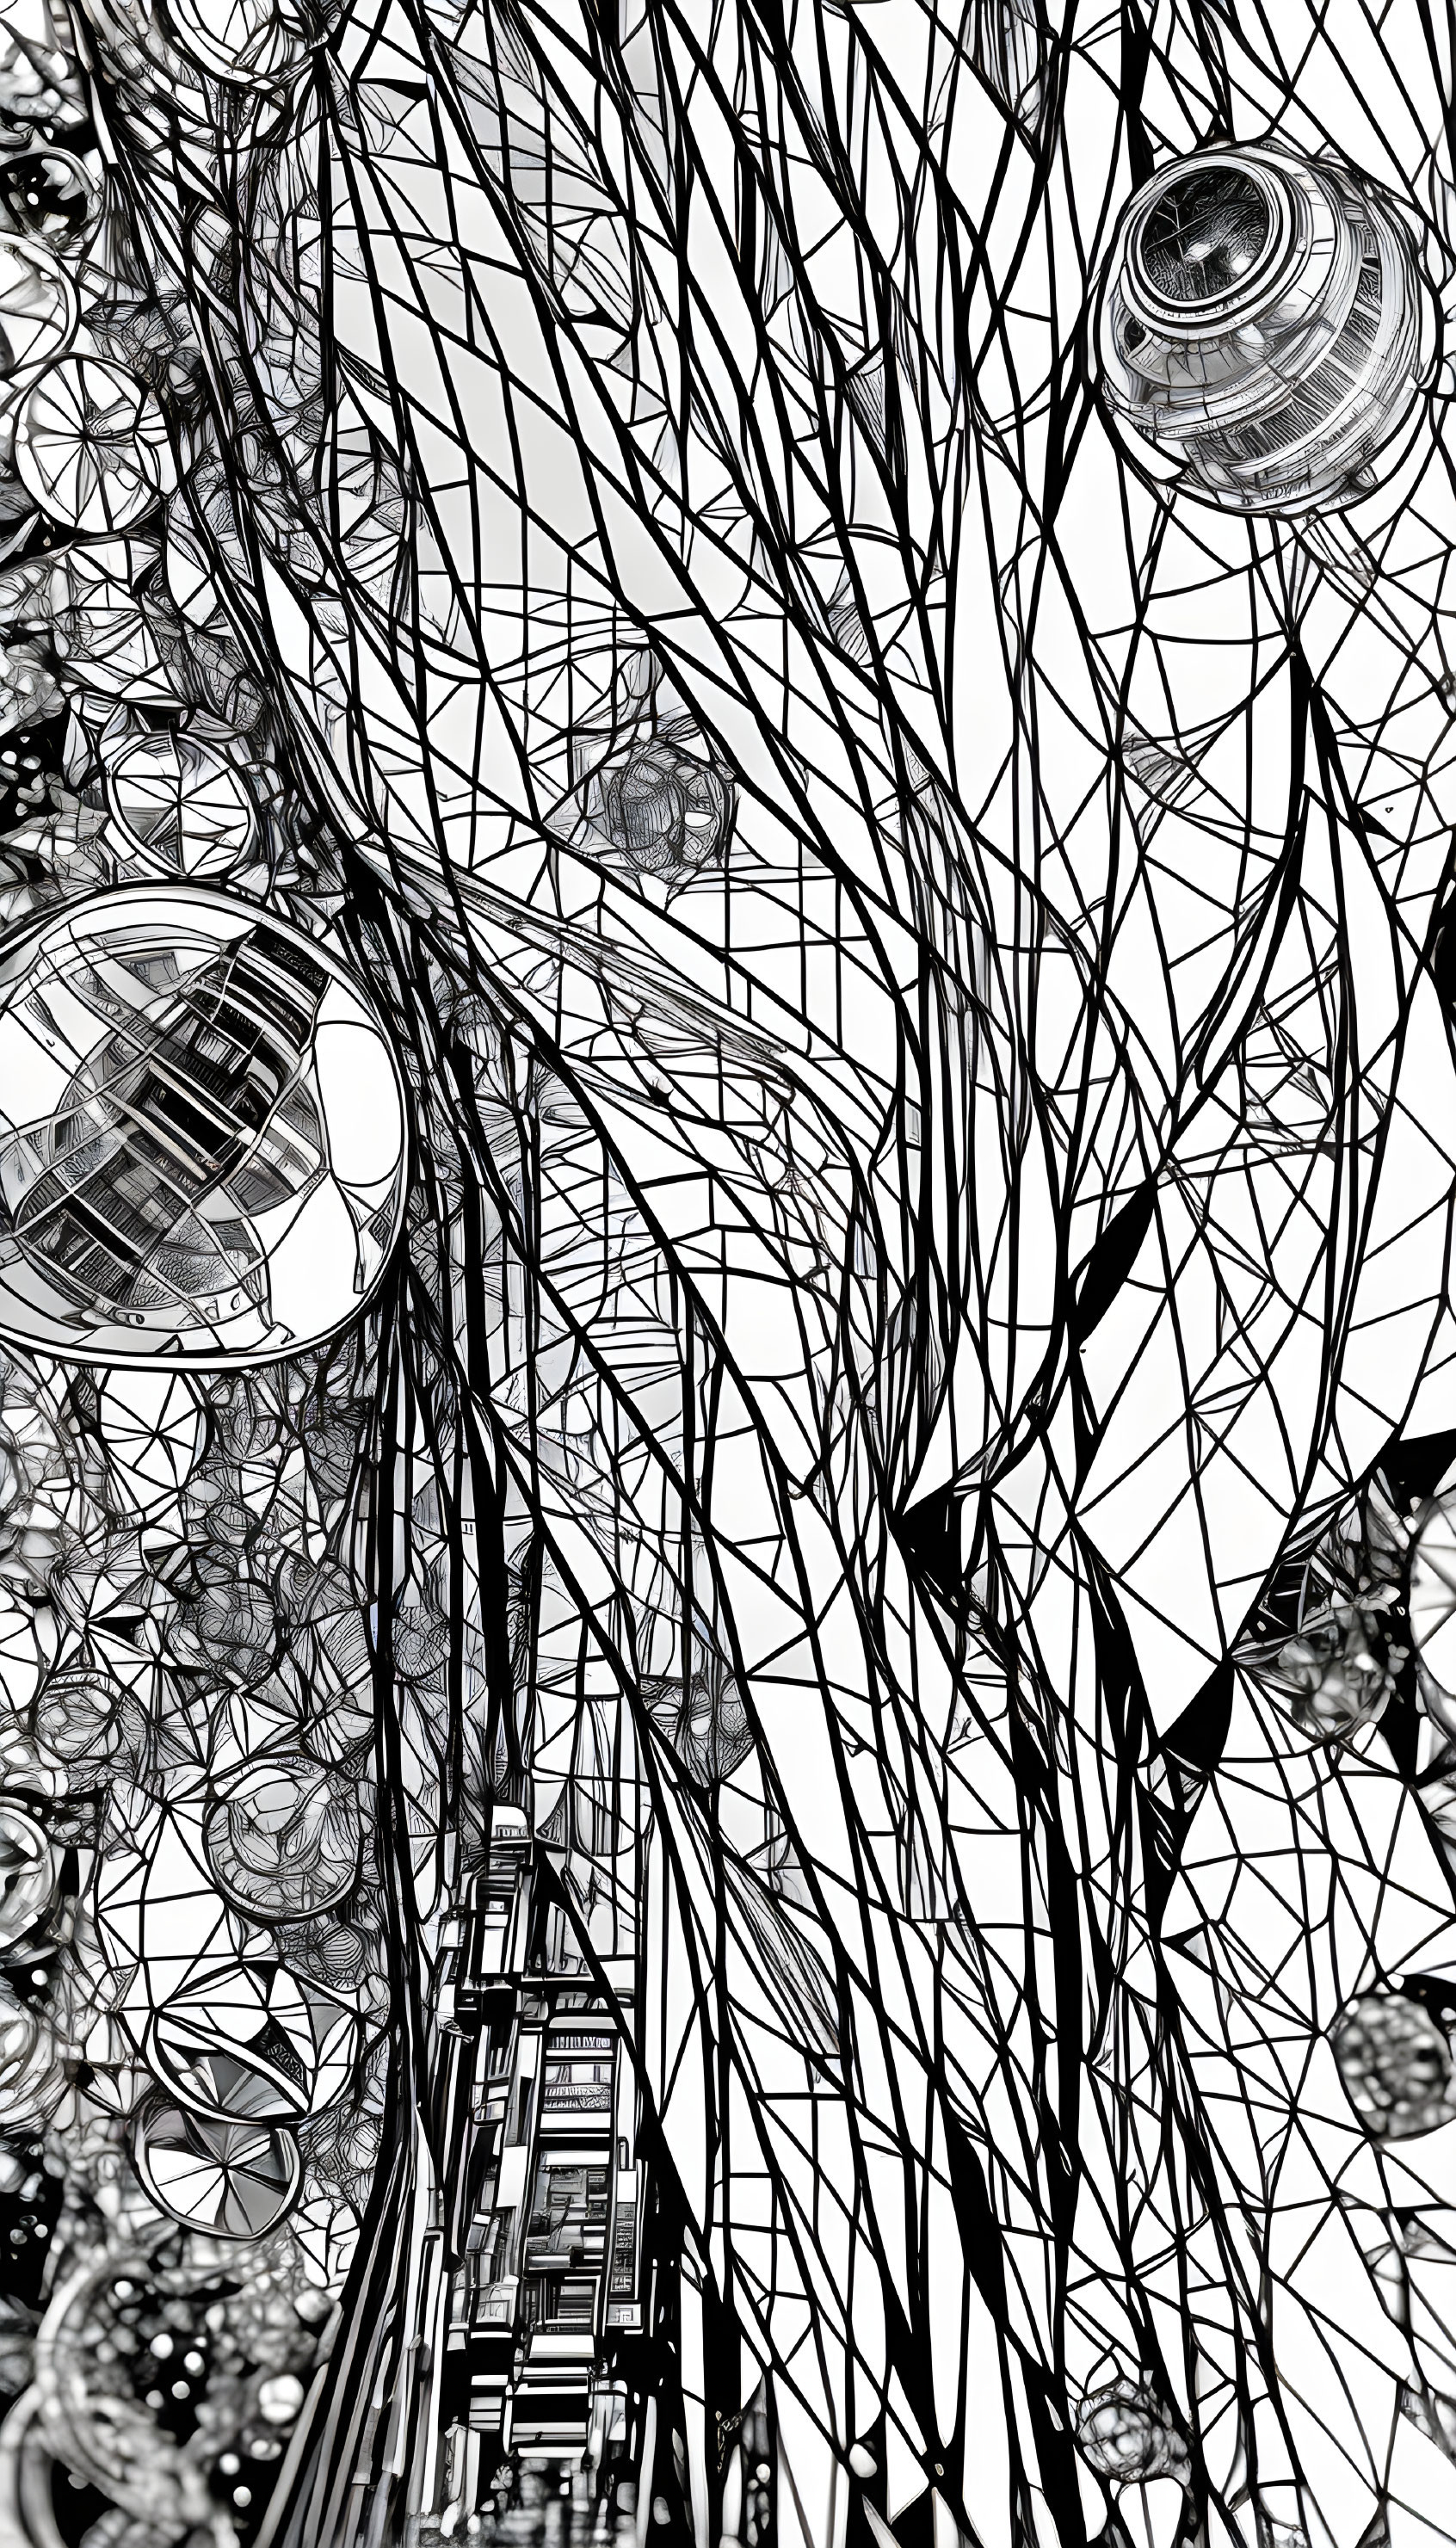 Monochrome abstract art with intricate patterns and spherical shapes